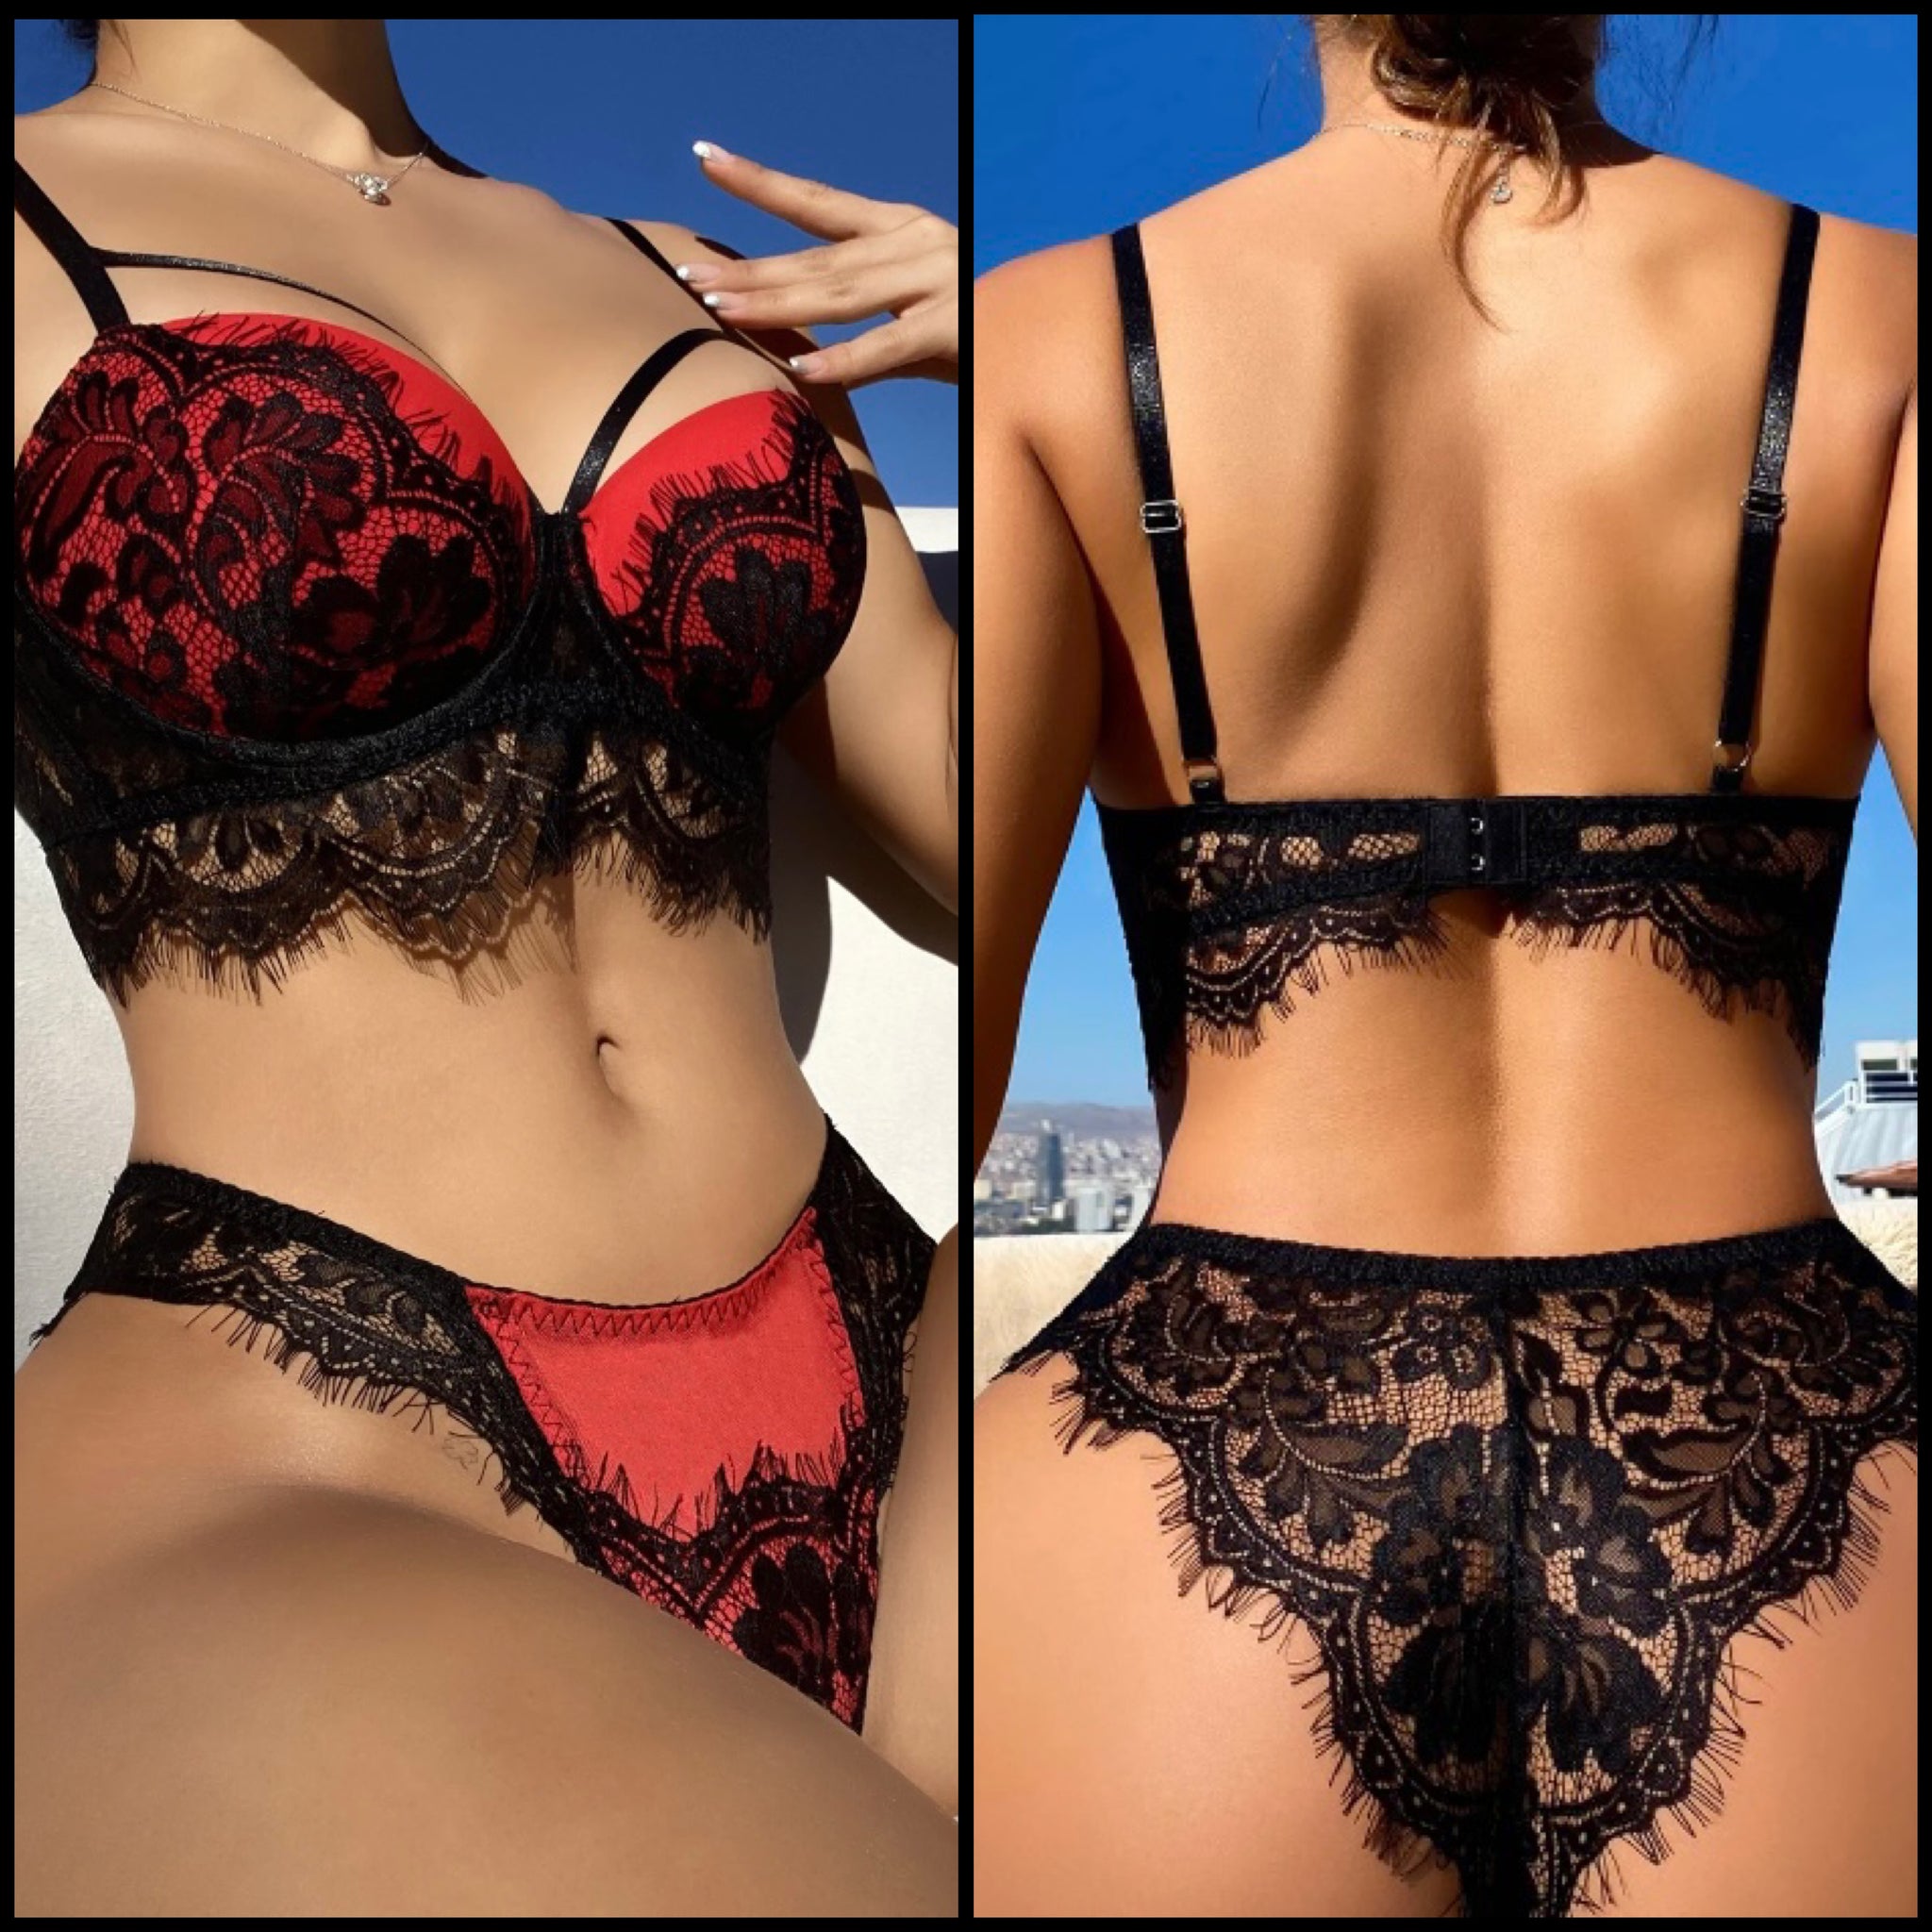 Women Sexy Red & Black Lace Lingerie Set